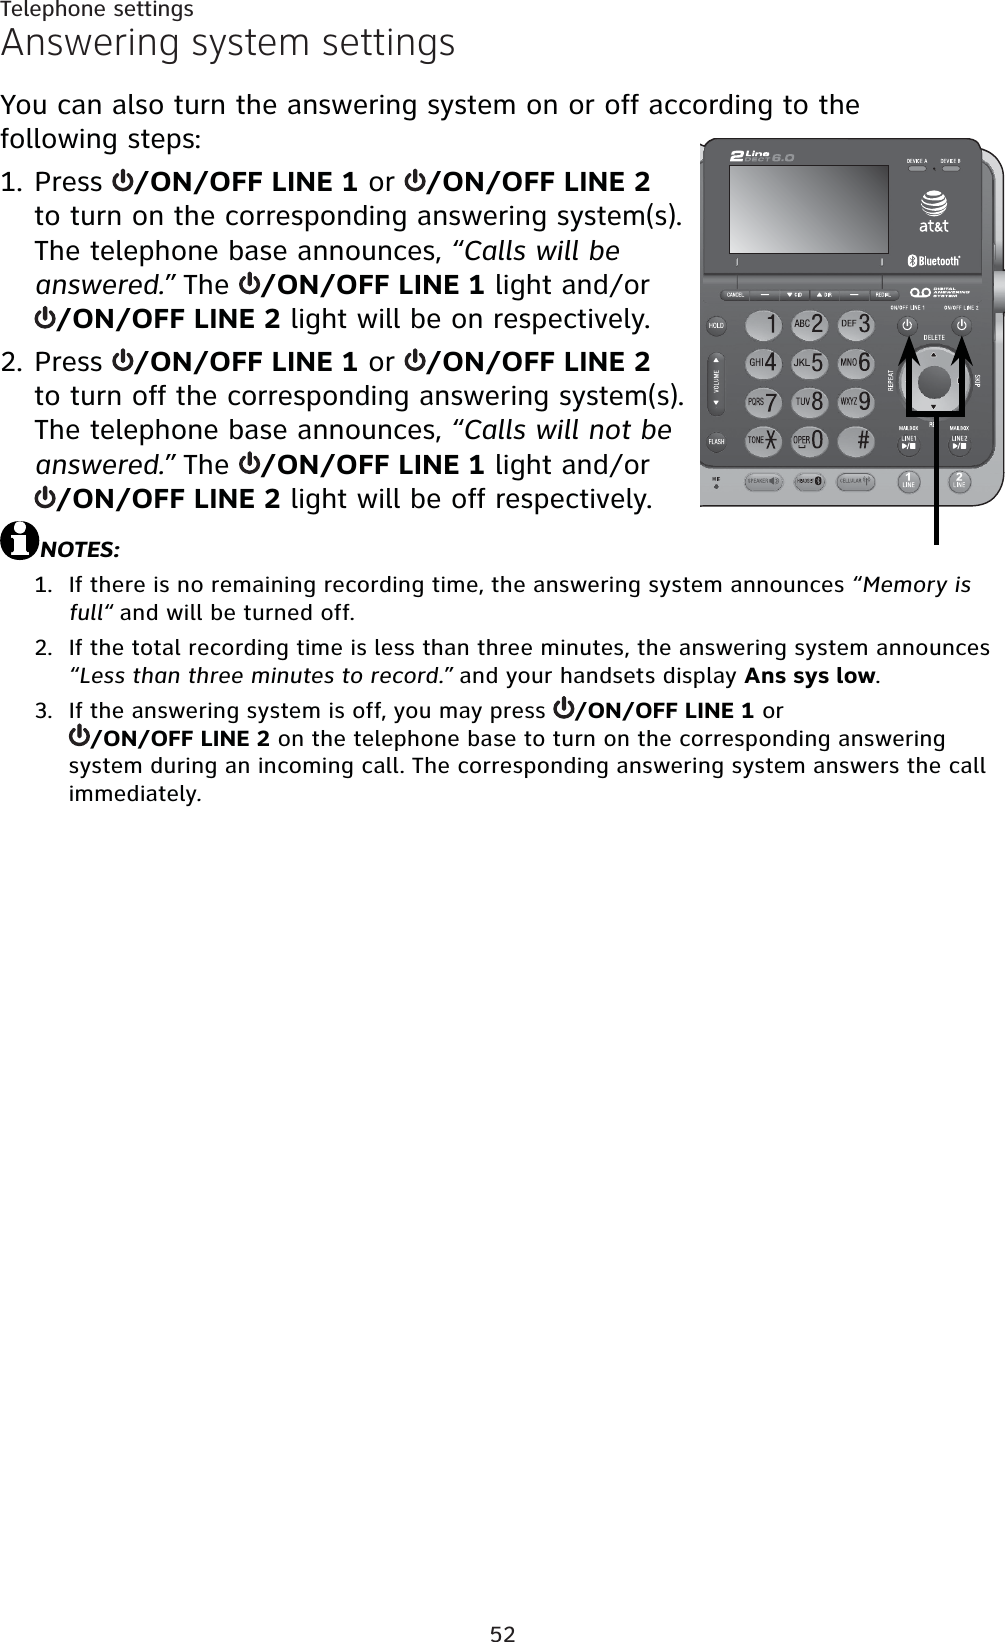 52Telephone settingsAnswering system settingsYou can also turn the answering system on or off according to the following steps:Press  /ON/OFF LINE 1 or  /ON/OFF LINE 2 to turn on the corresponding answering system(s). The telephone base announces, “Calls will be answered.” The  /ON/OFF LINE 1 light and/or /ON/OFF LINE 2 light will be on respectively.Press  /ON/OFF LINE 1 or  /ON/OFF LINE 2 to turn off the corresponding answering system(s). The telephone base announces, “Calls will not be answered.” The  /ON/OFF LINE 1 light and/or /ON/OFF LINE 2 light will be off respectively.NOTES:If there is no remaining recording time, the answering system announces “Memory is full“ and will be turned off.If the total recording time is less than three minutes, the answering system announces “Less than three minutes to record.” and your handsets display Ans sys low.If the answering system is off, you may press  /ON/OFF LINE 1 or /ON/OFF LINE 2 on the telephone base to turn on the corresponding answering system during an incoming call. The corresponding answering system answers the call immediately.1.2.1.2.3.